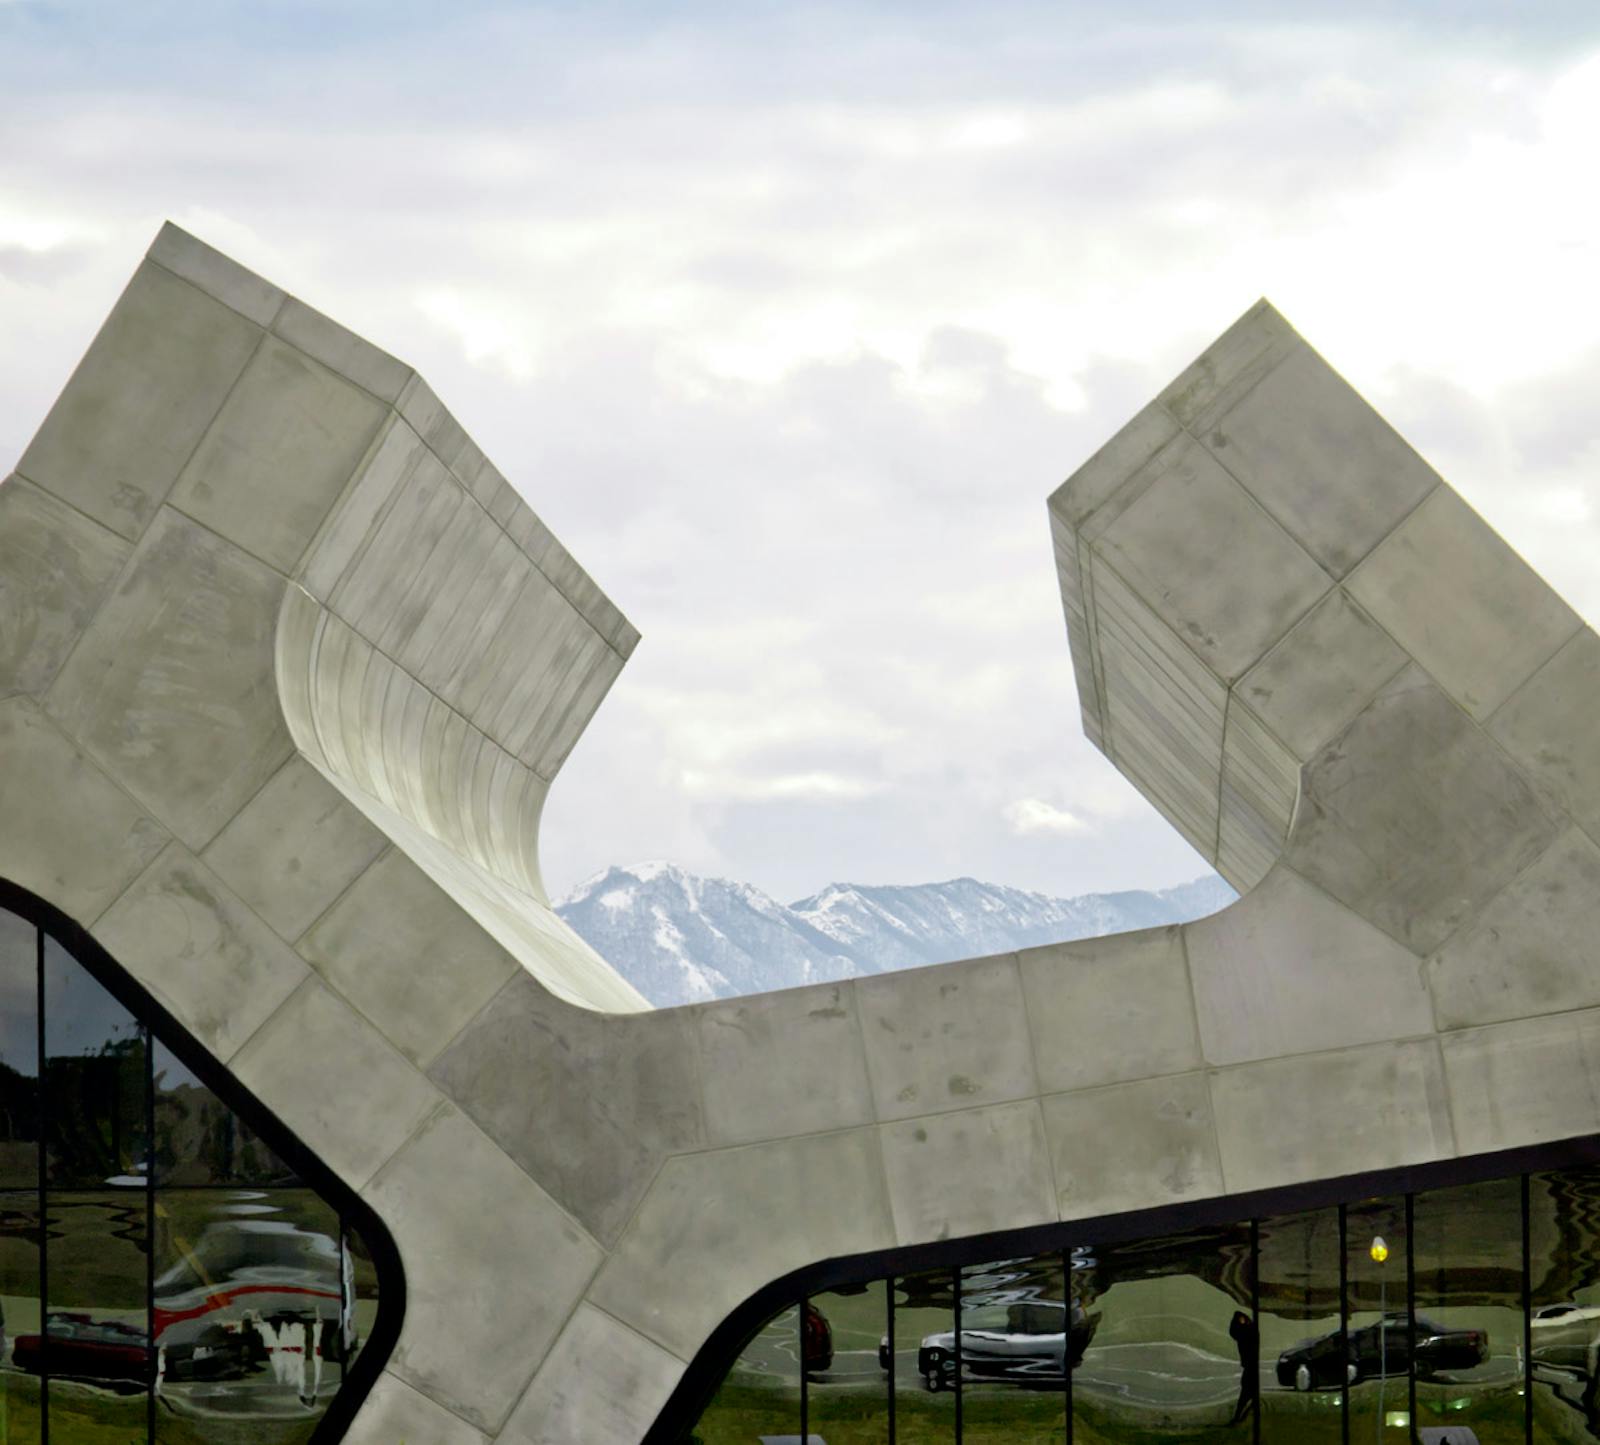 J. MAYER H. Designs Series of Highway Rest Areas in Georgia